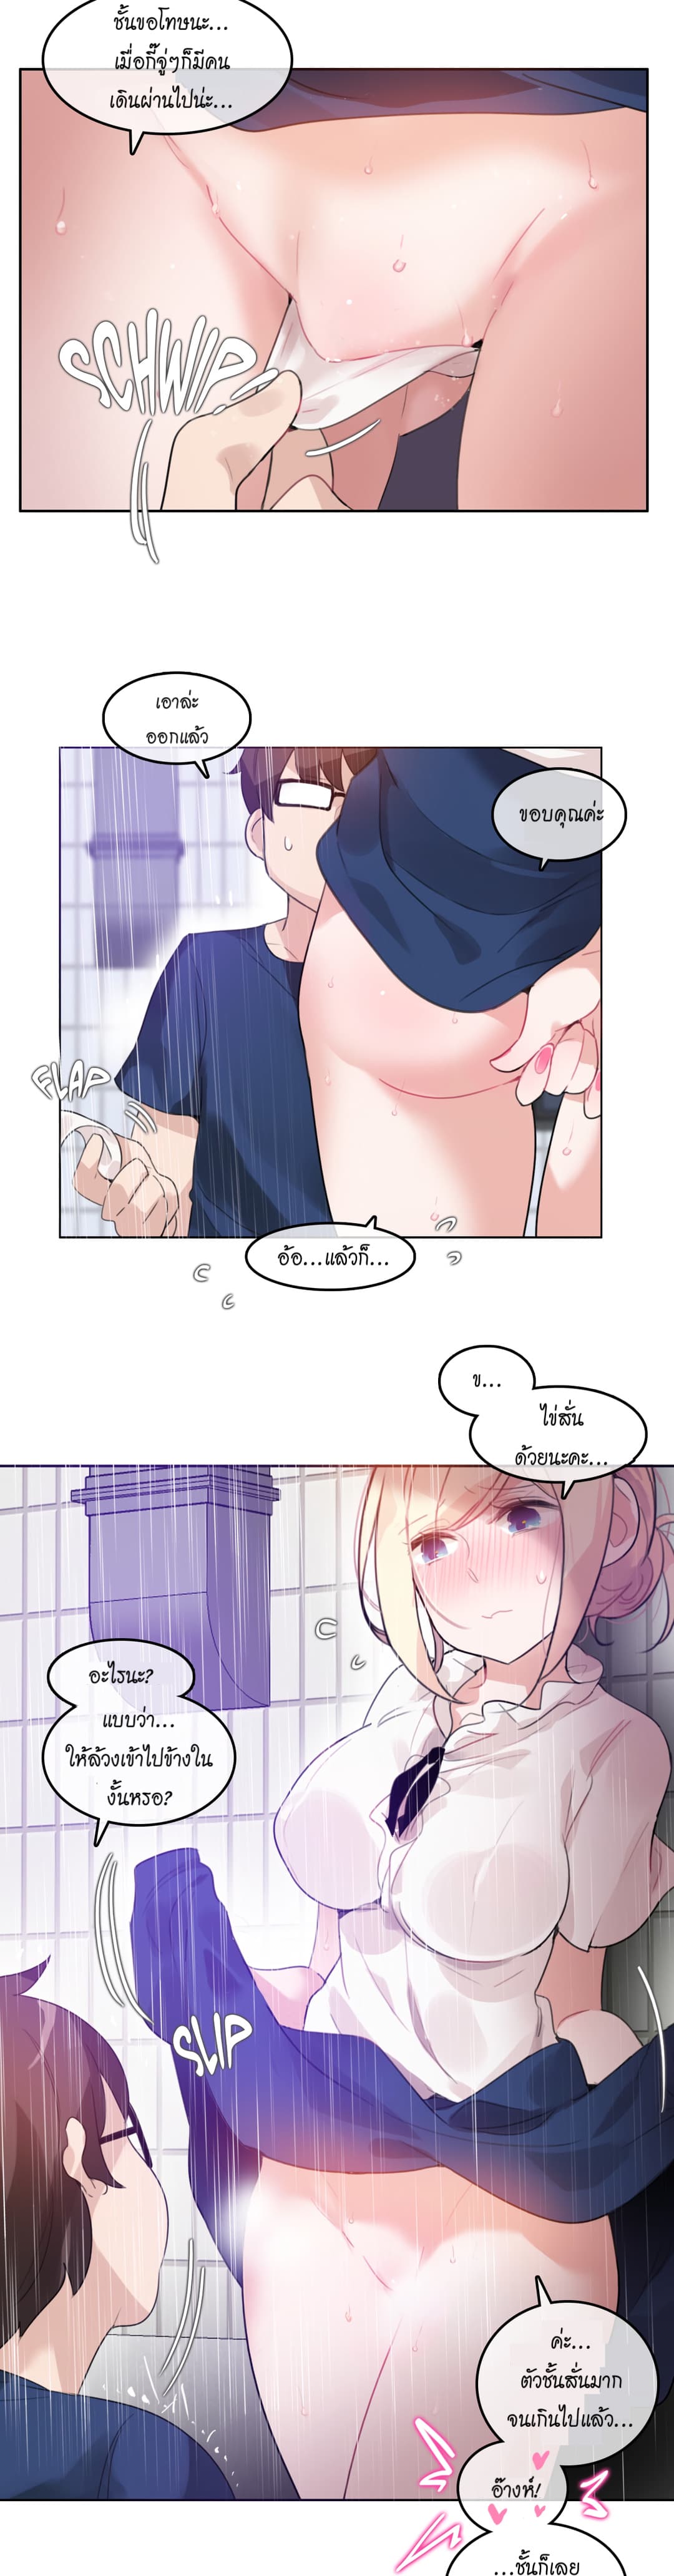 A Pervert’s Daily Life 36 (10)